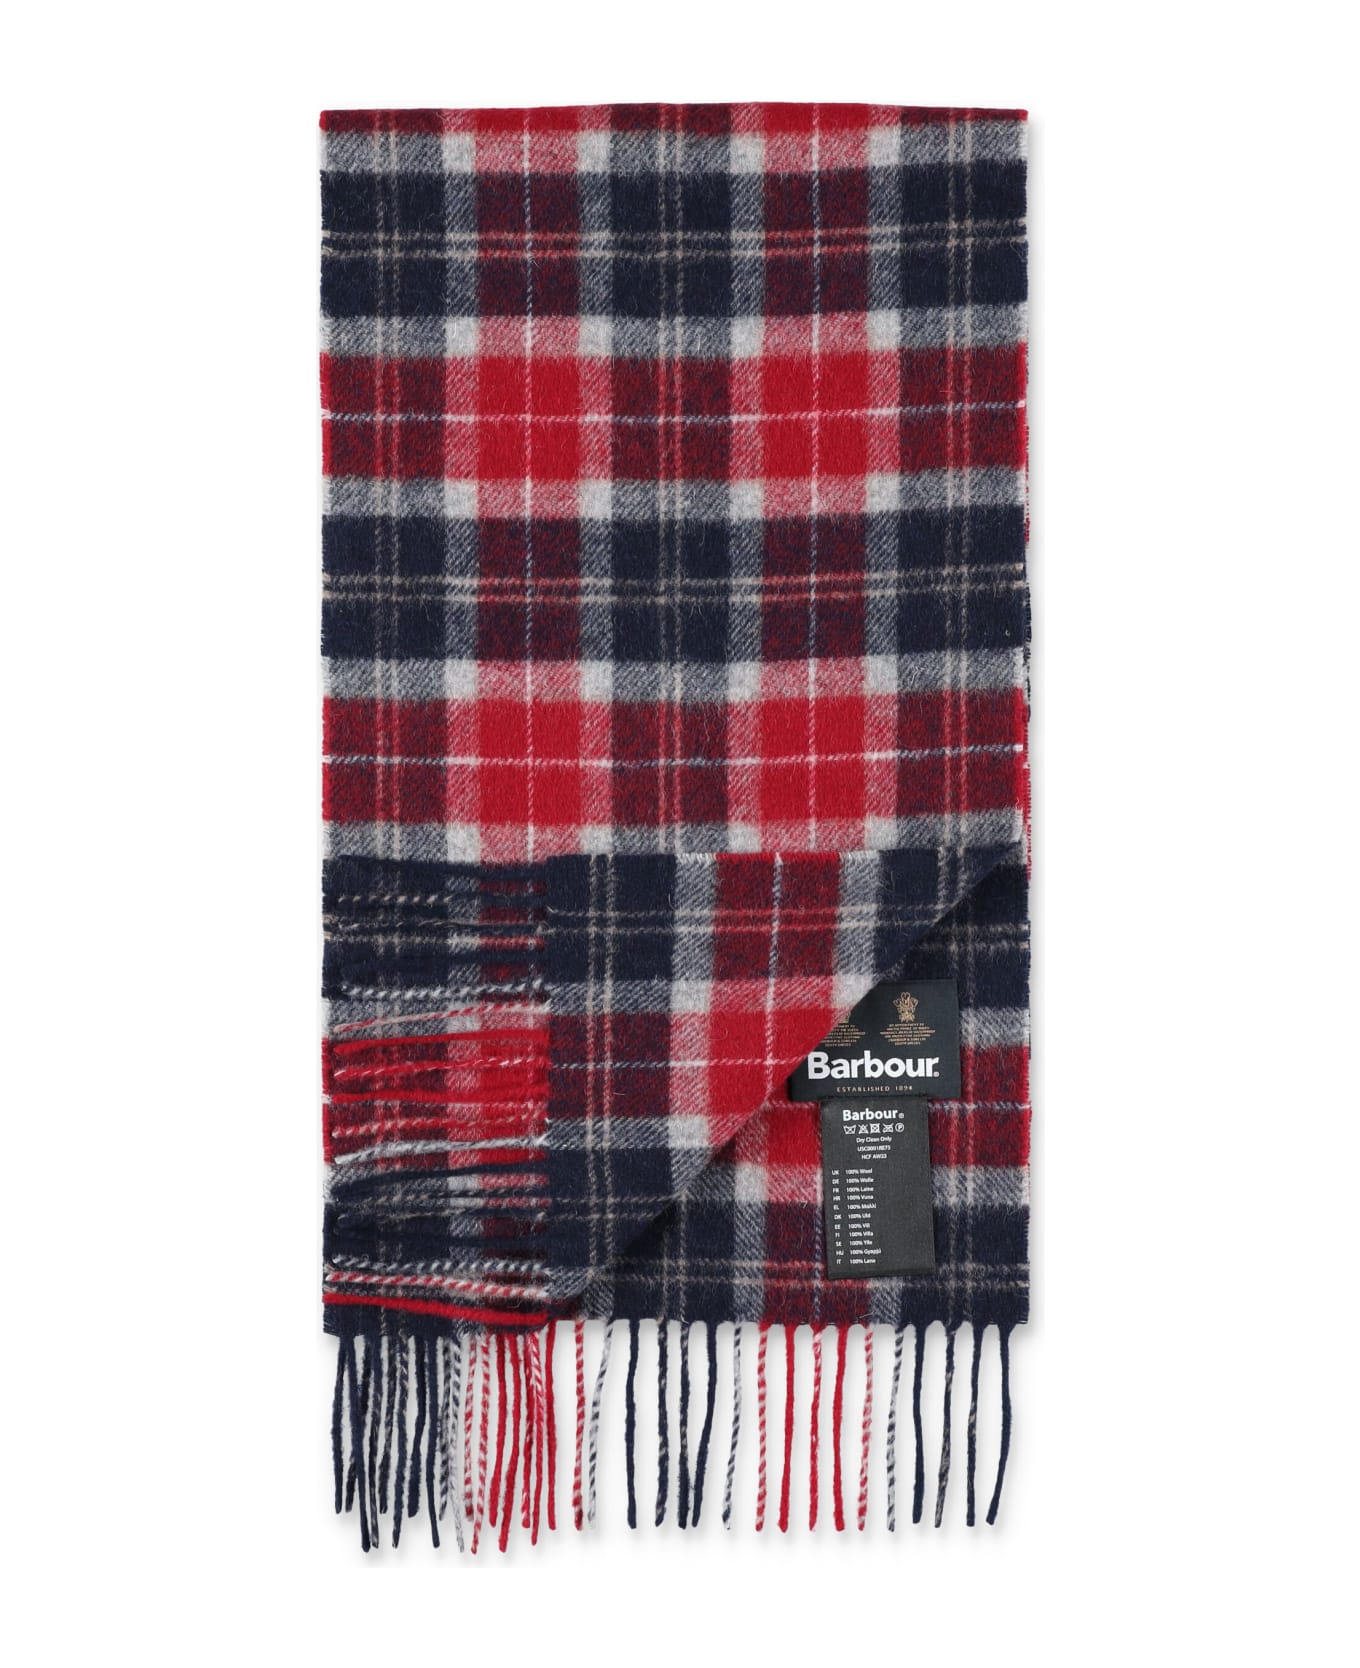 Barbour Scarf Check - RED/NAVY TARTAN スカーフ